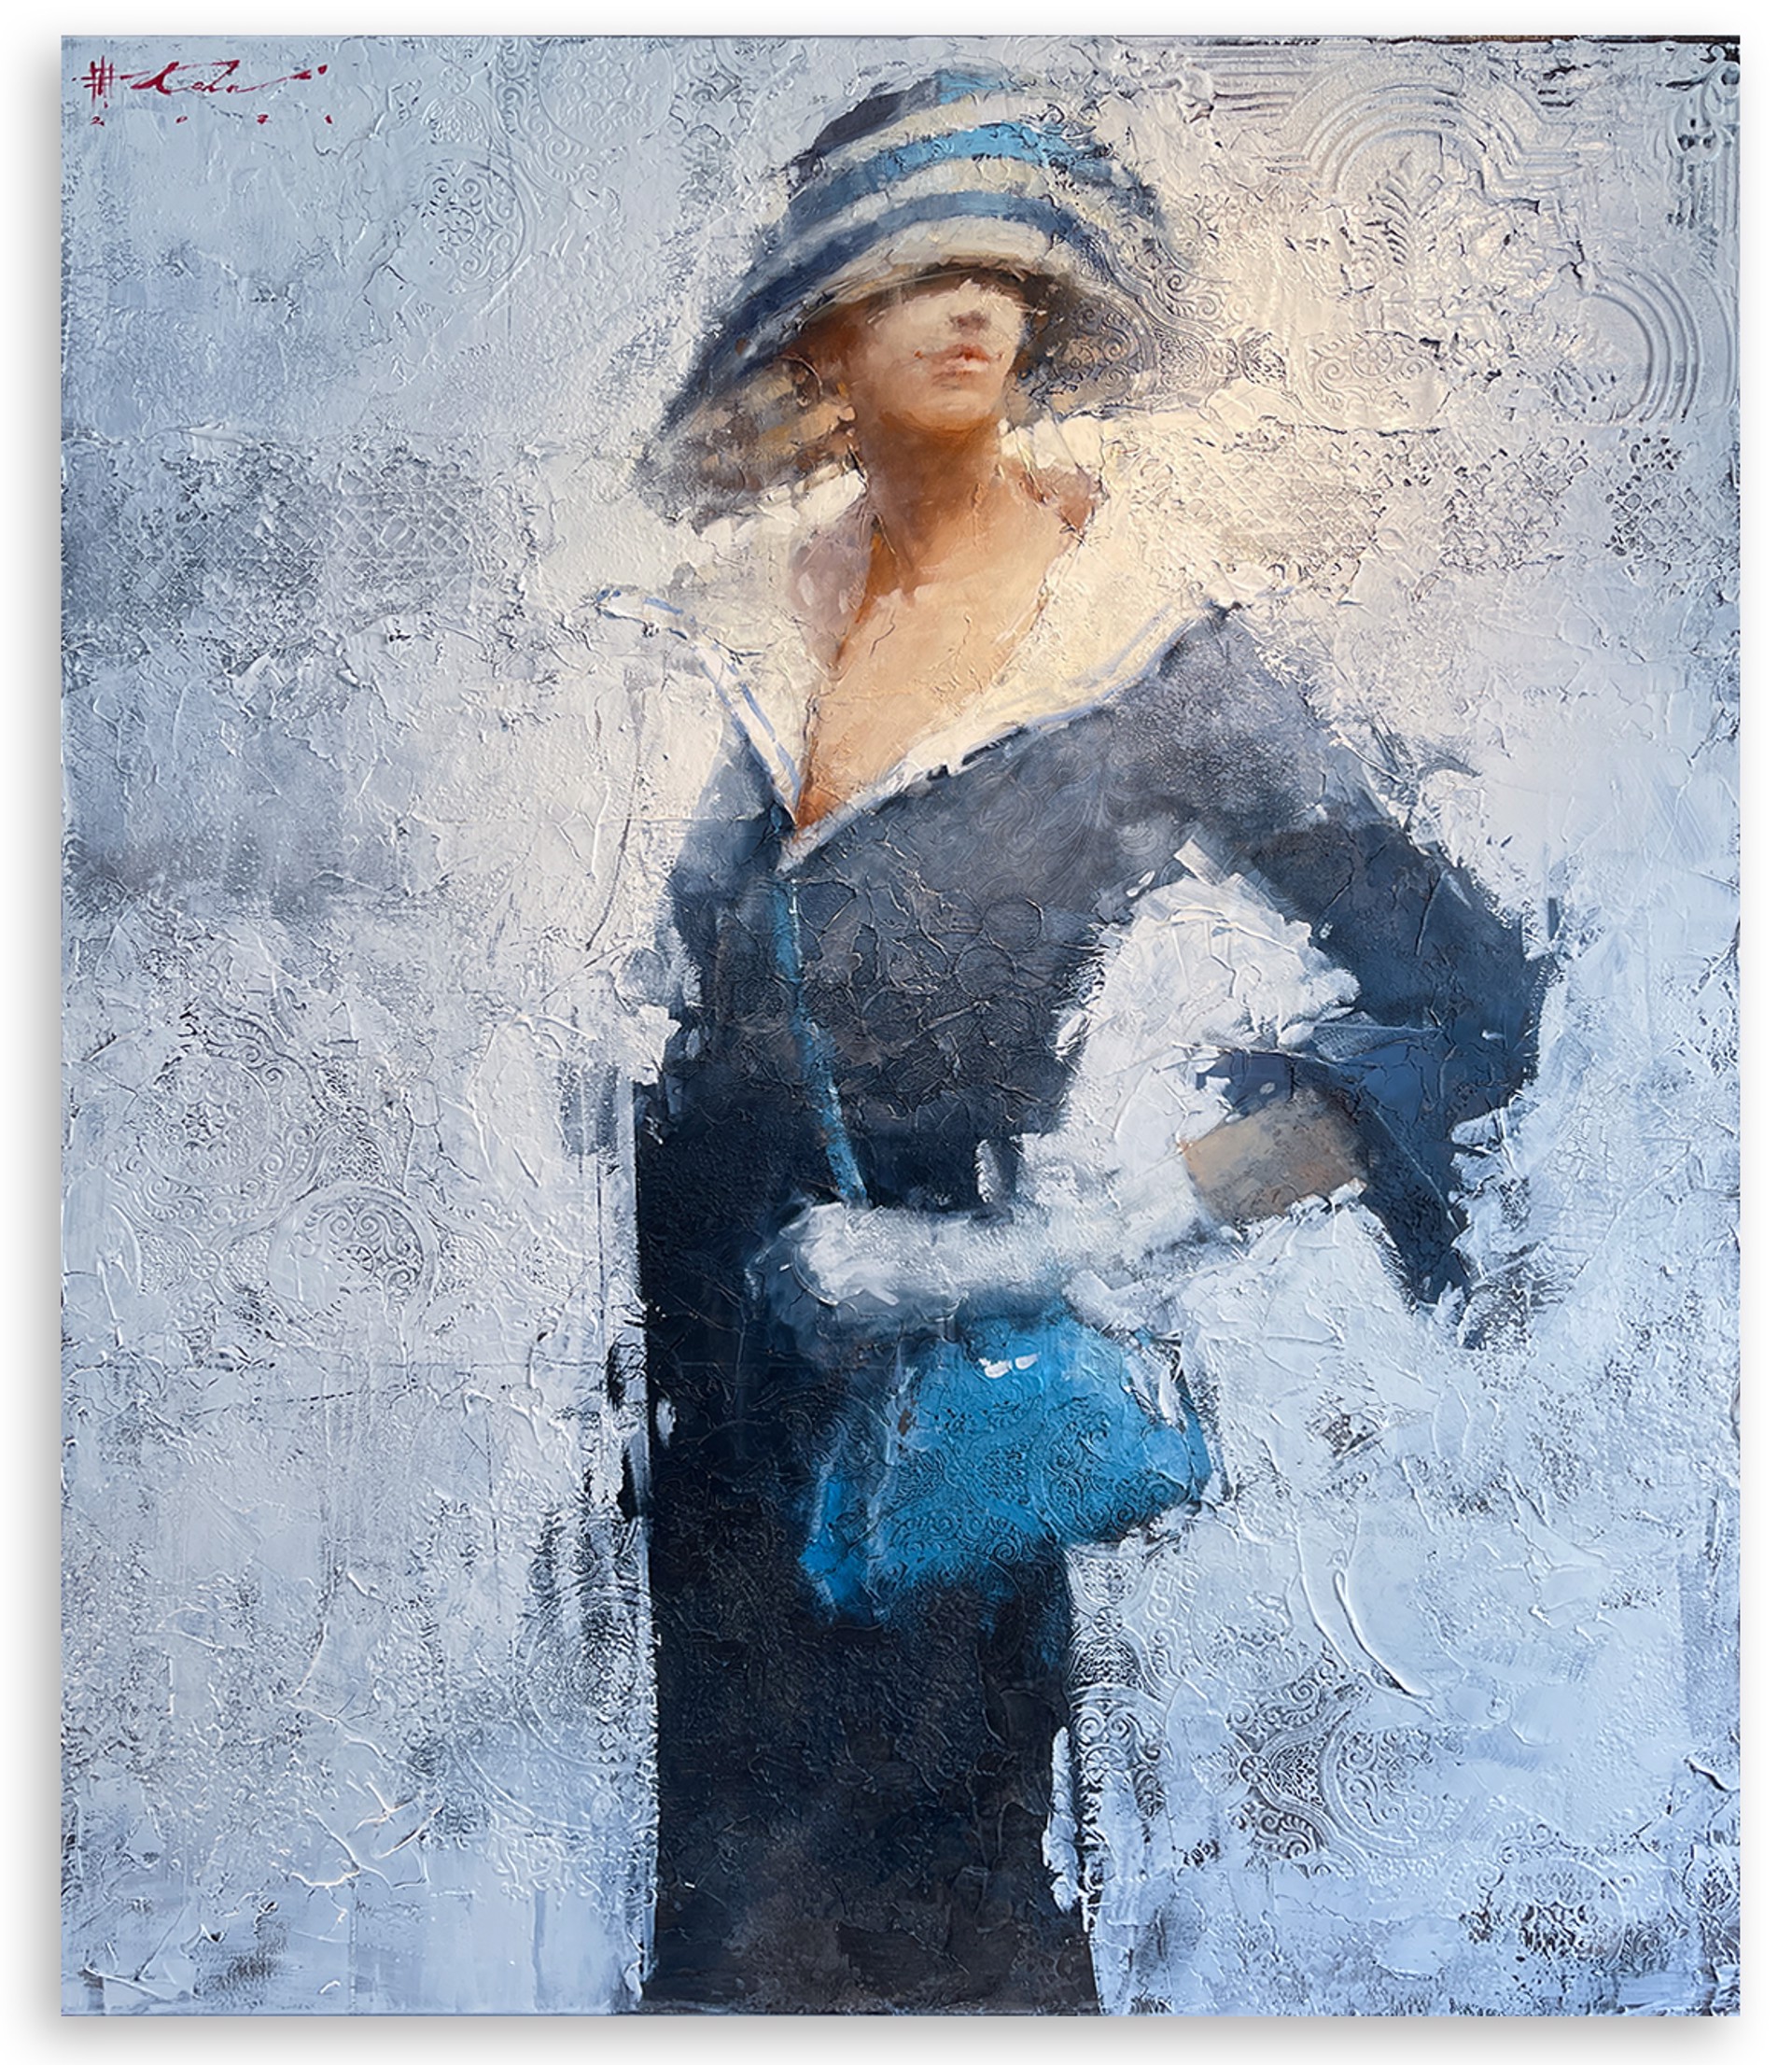 "Rhapsody on the Theme of Blue and Turquoise" AKD by Andre Kohn